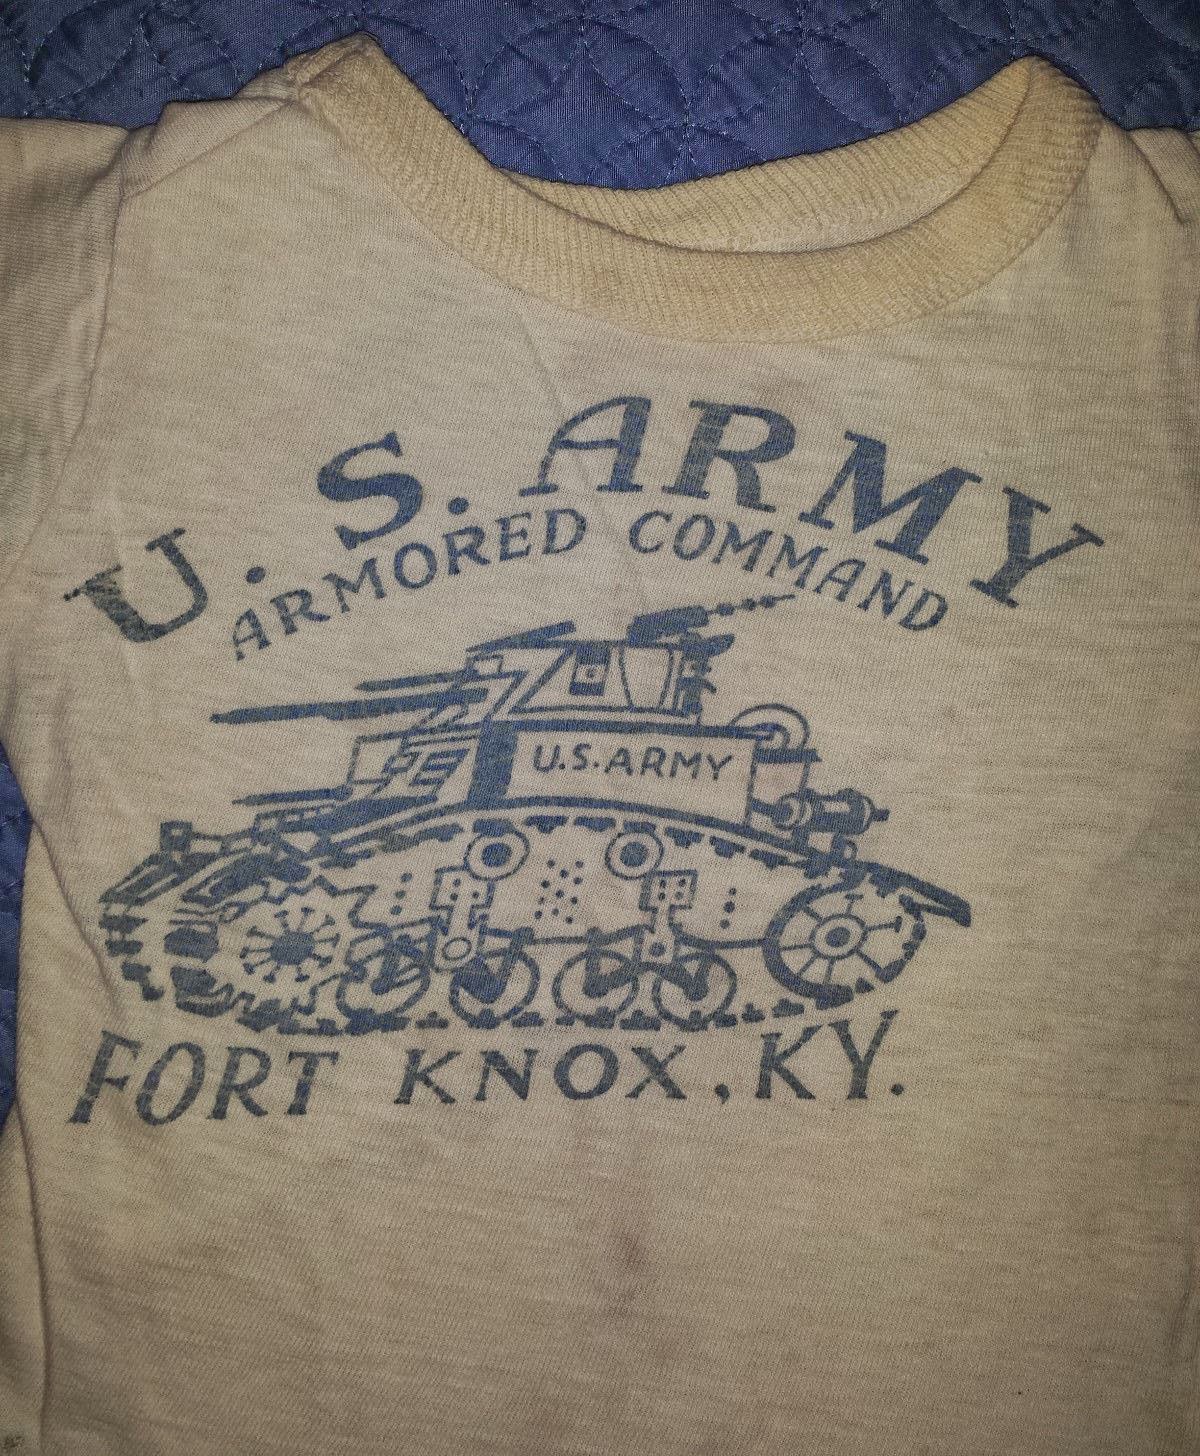 Nostalgia on Wheels: 1940's WWII US Army Armored Command - Fort Knox ...